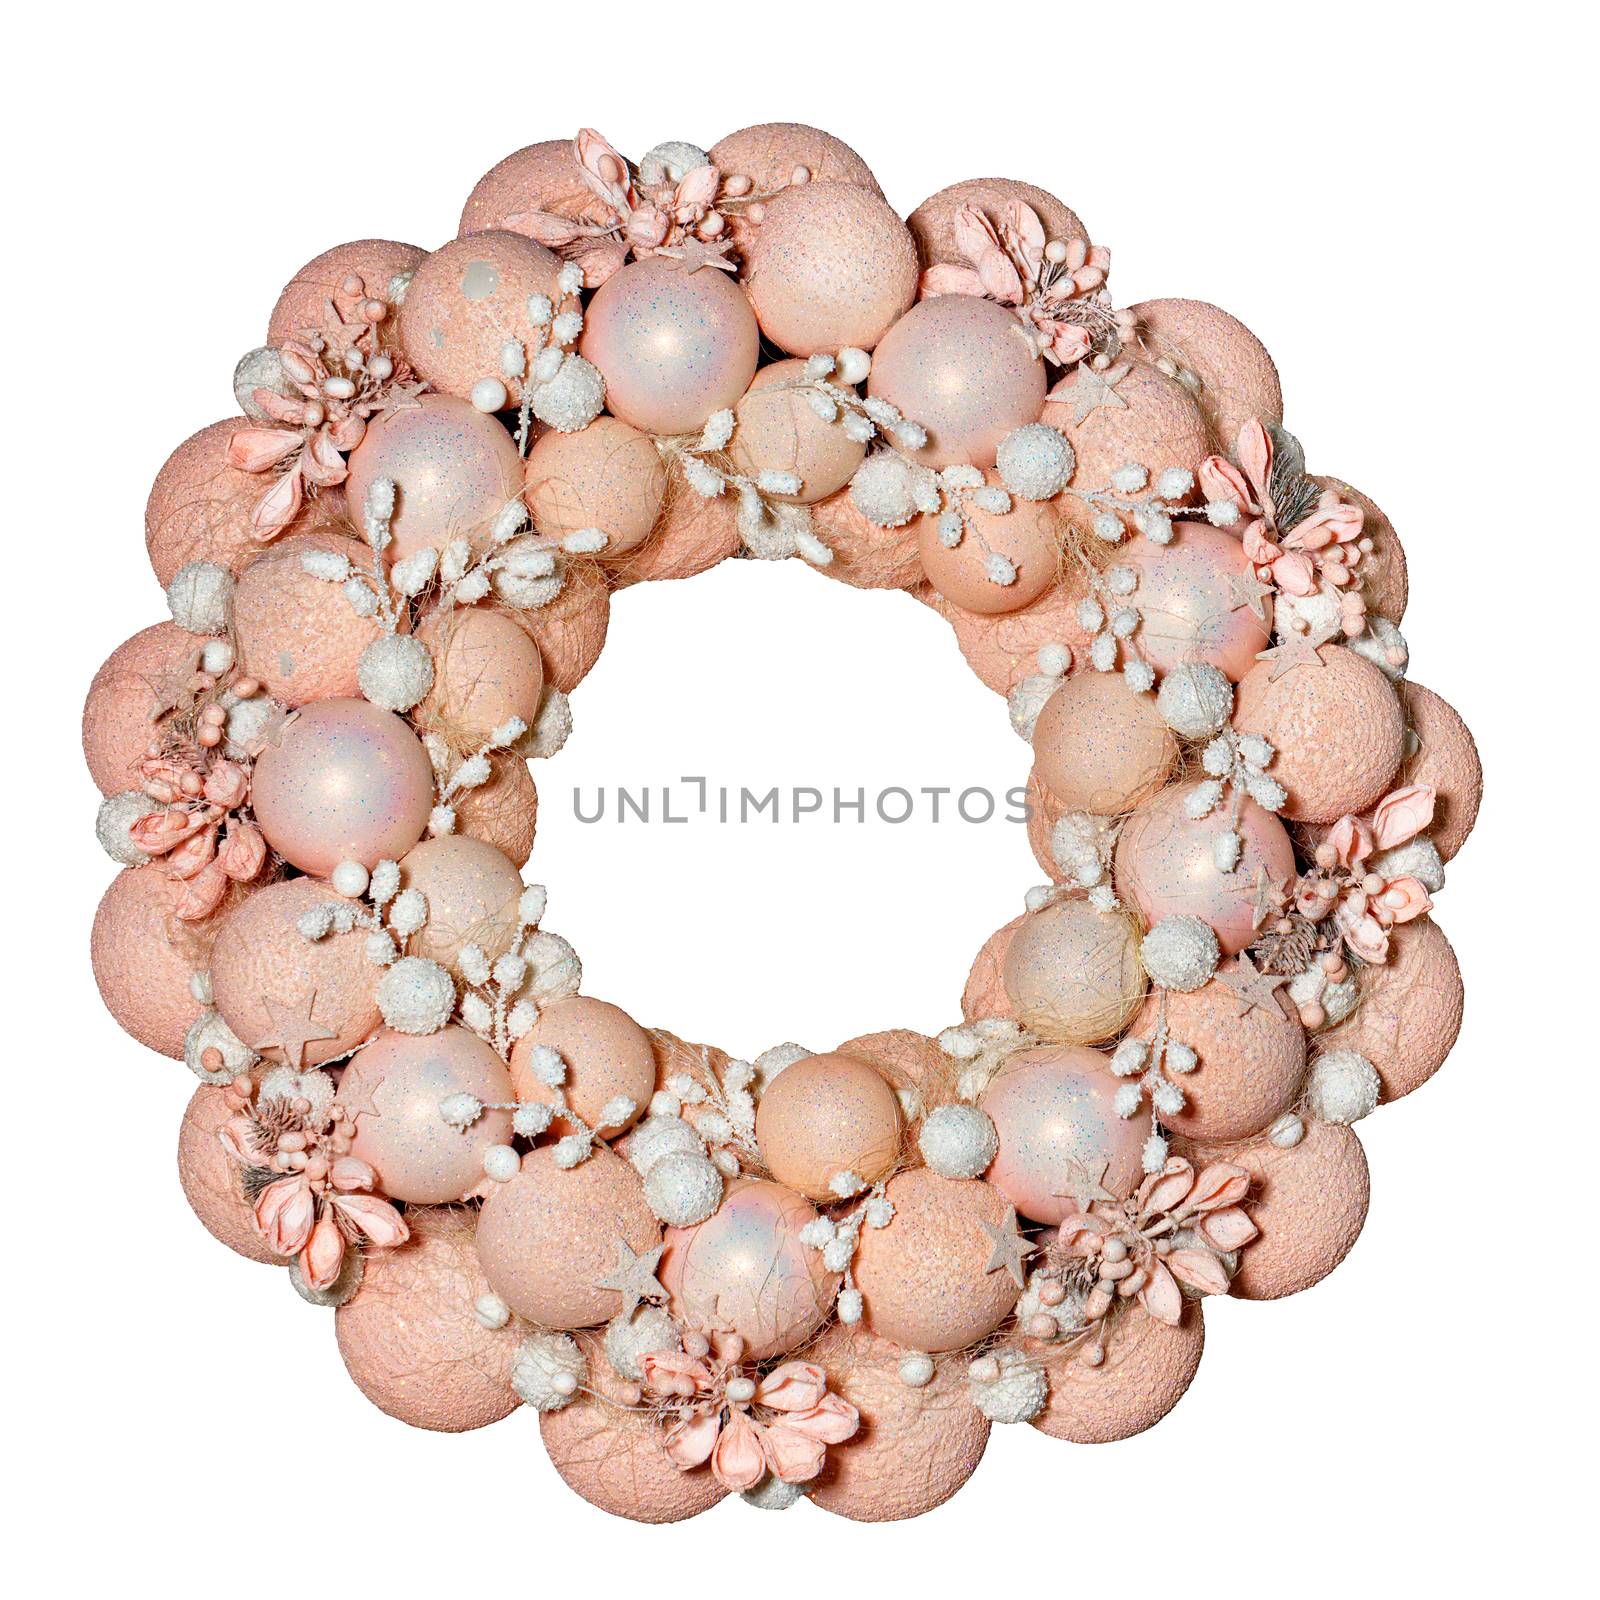 Christmas wreath with decorative balls, flowers and stars in pink and beige pastel colors, isolated on white. by Sergii